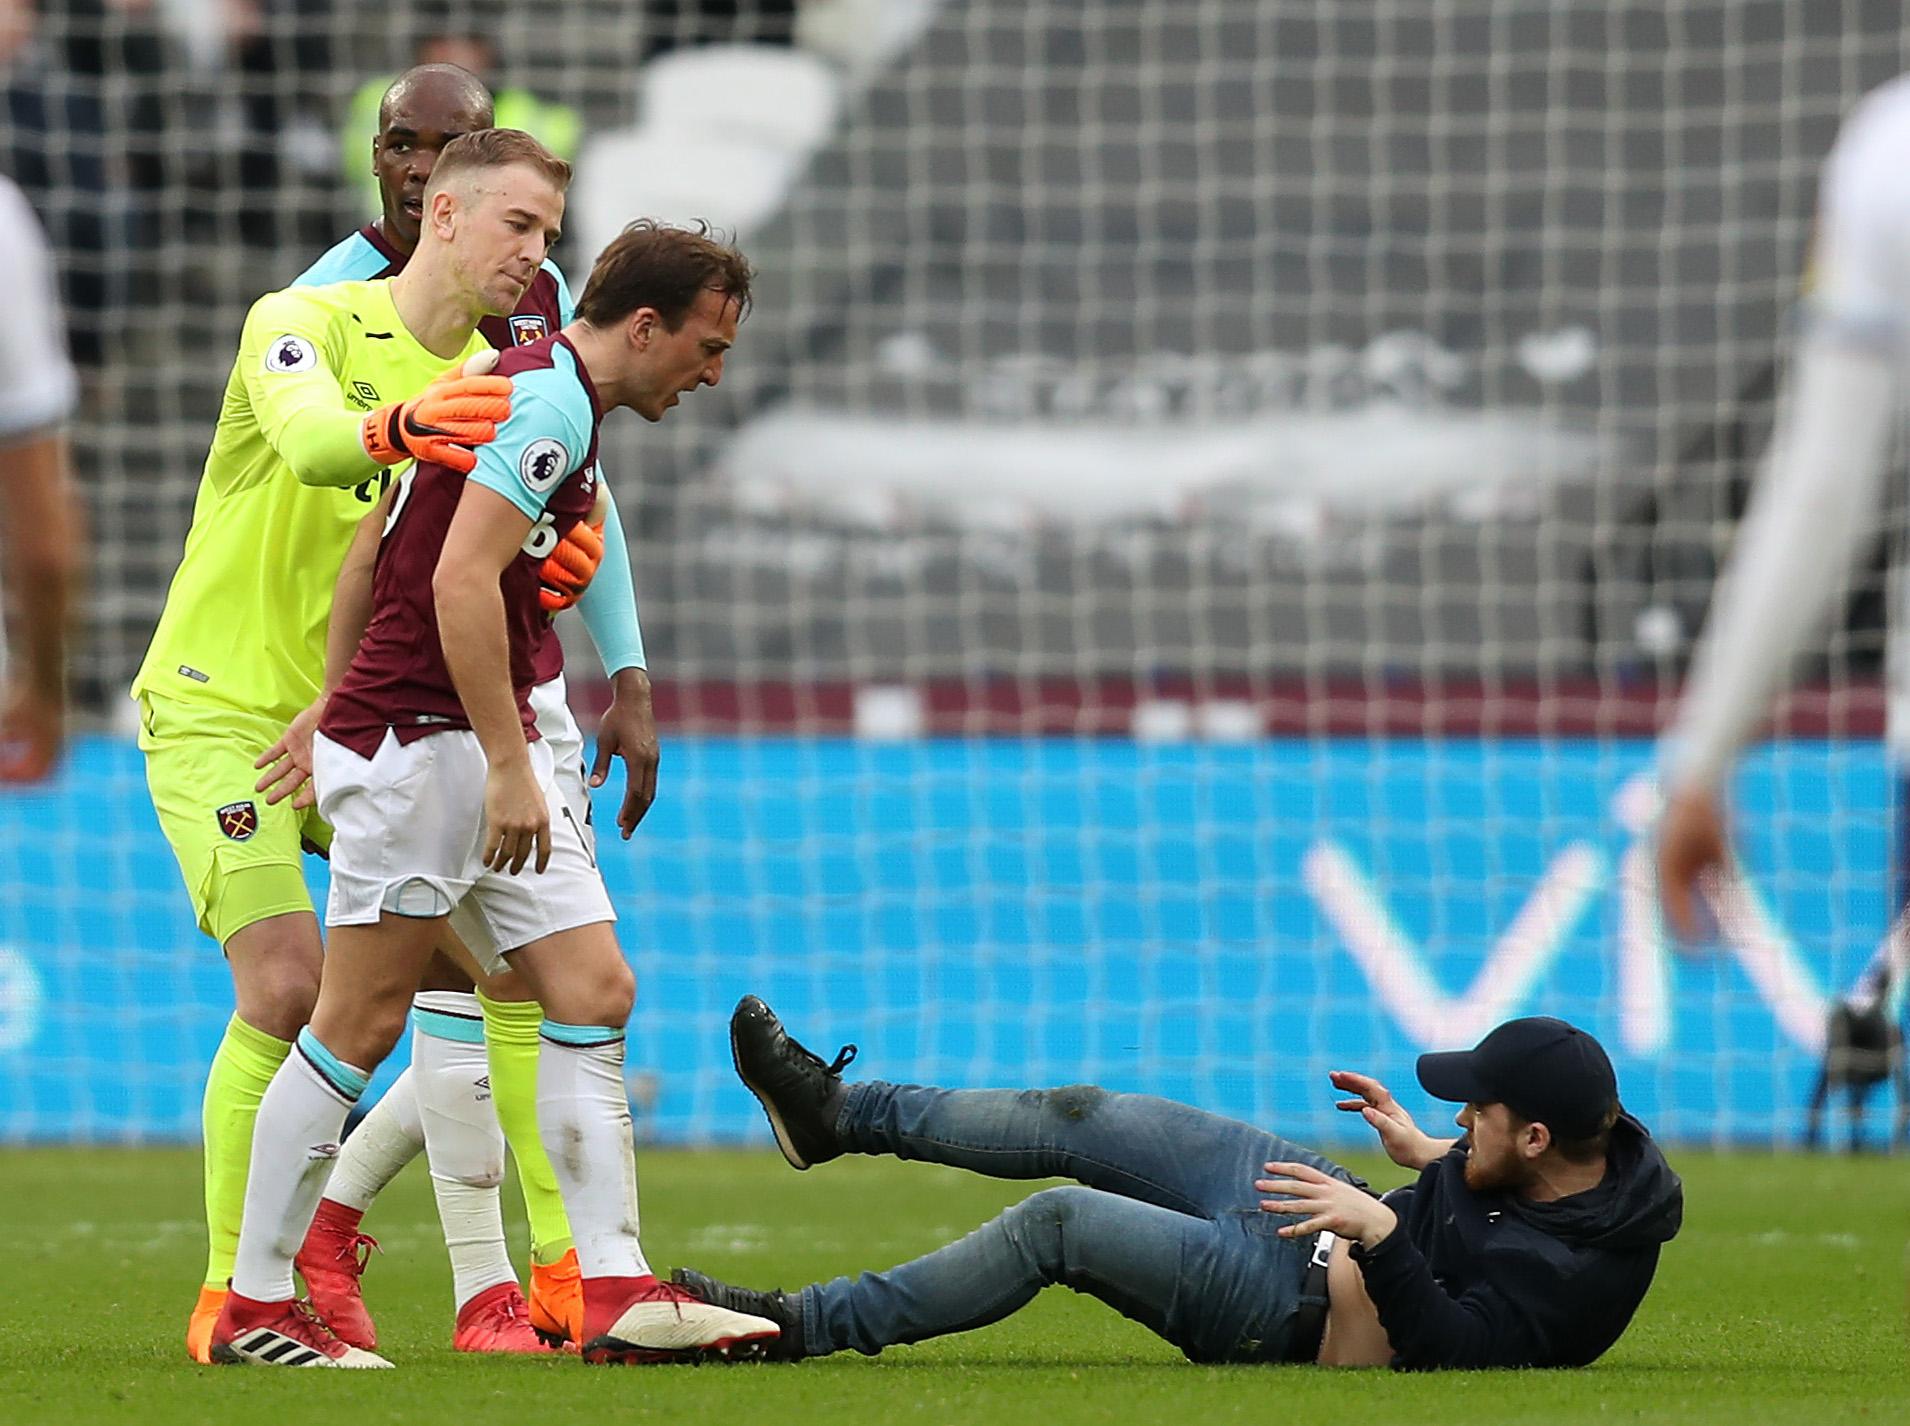 West Ham set to hand life bans to fans involved in London Stadium pitch invasion